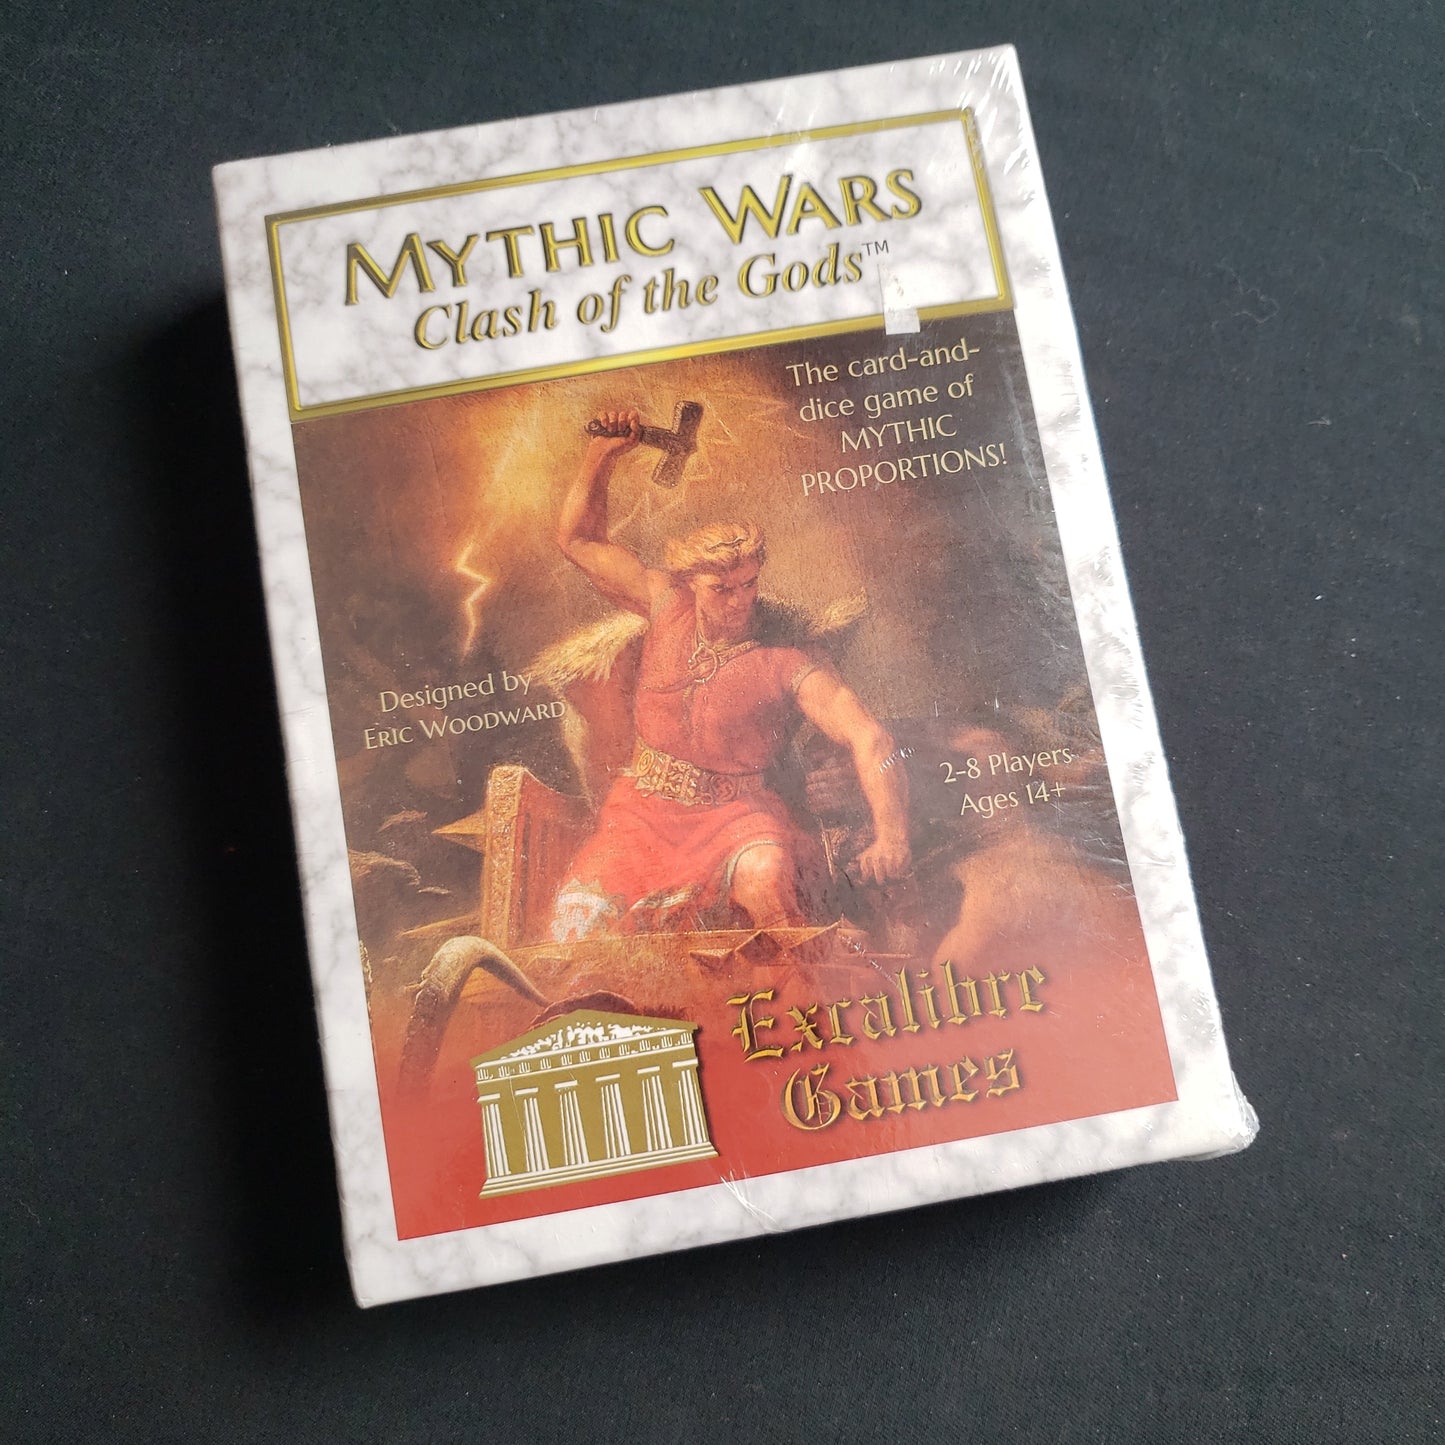 Image shows the front cover of the box of the Mythic Wars: Clash of the Gods card game